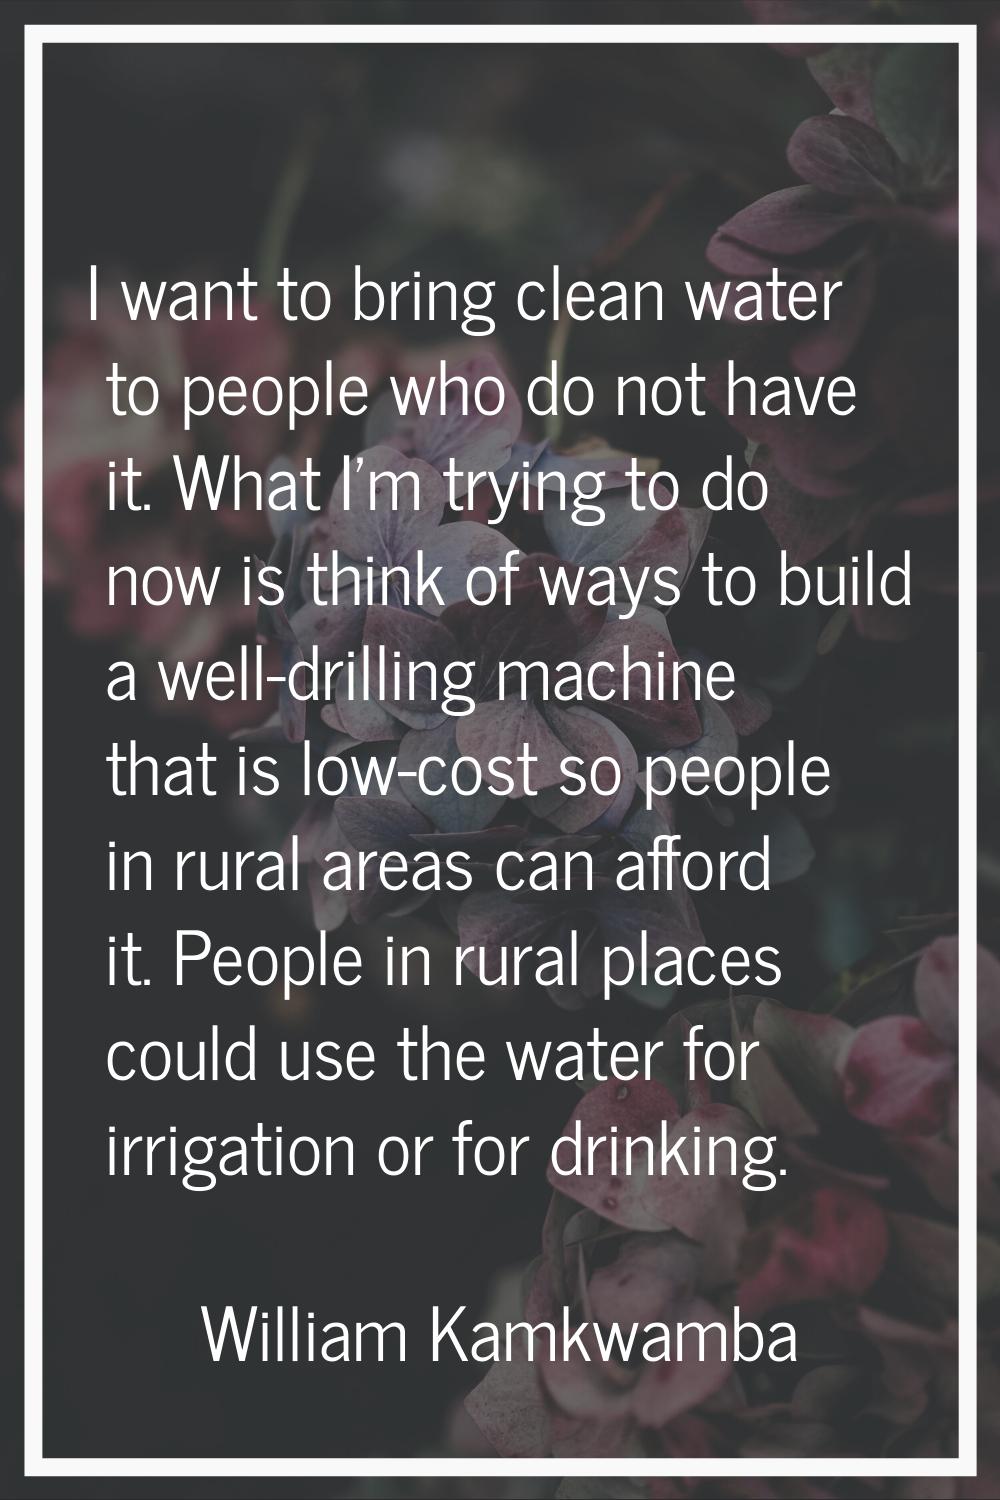 I want to bring clean water to people who do not have it. What I'm trying to do now is think of way